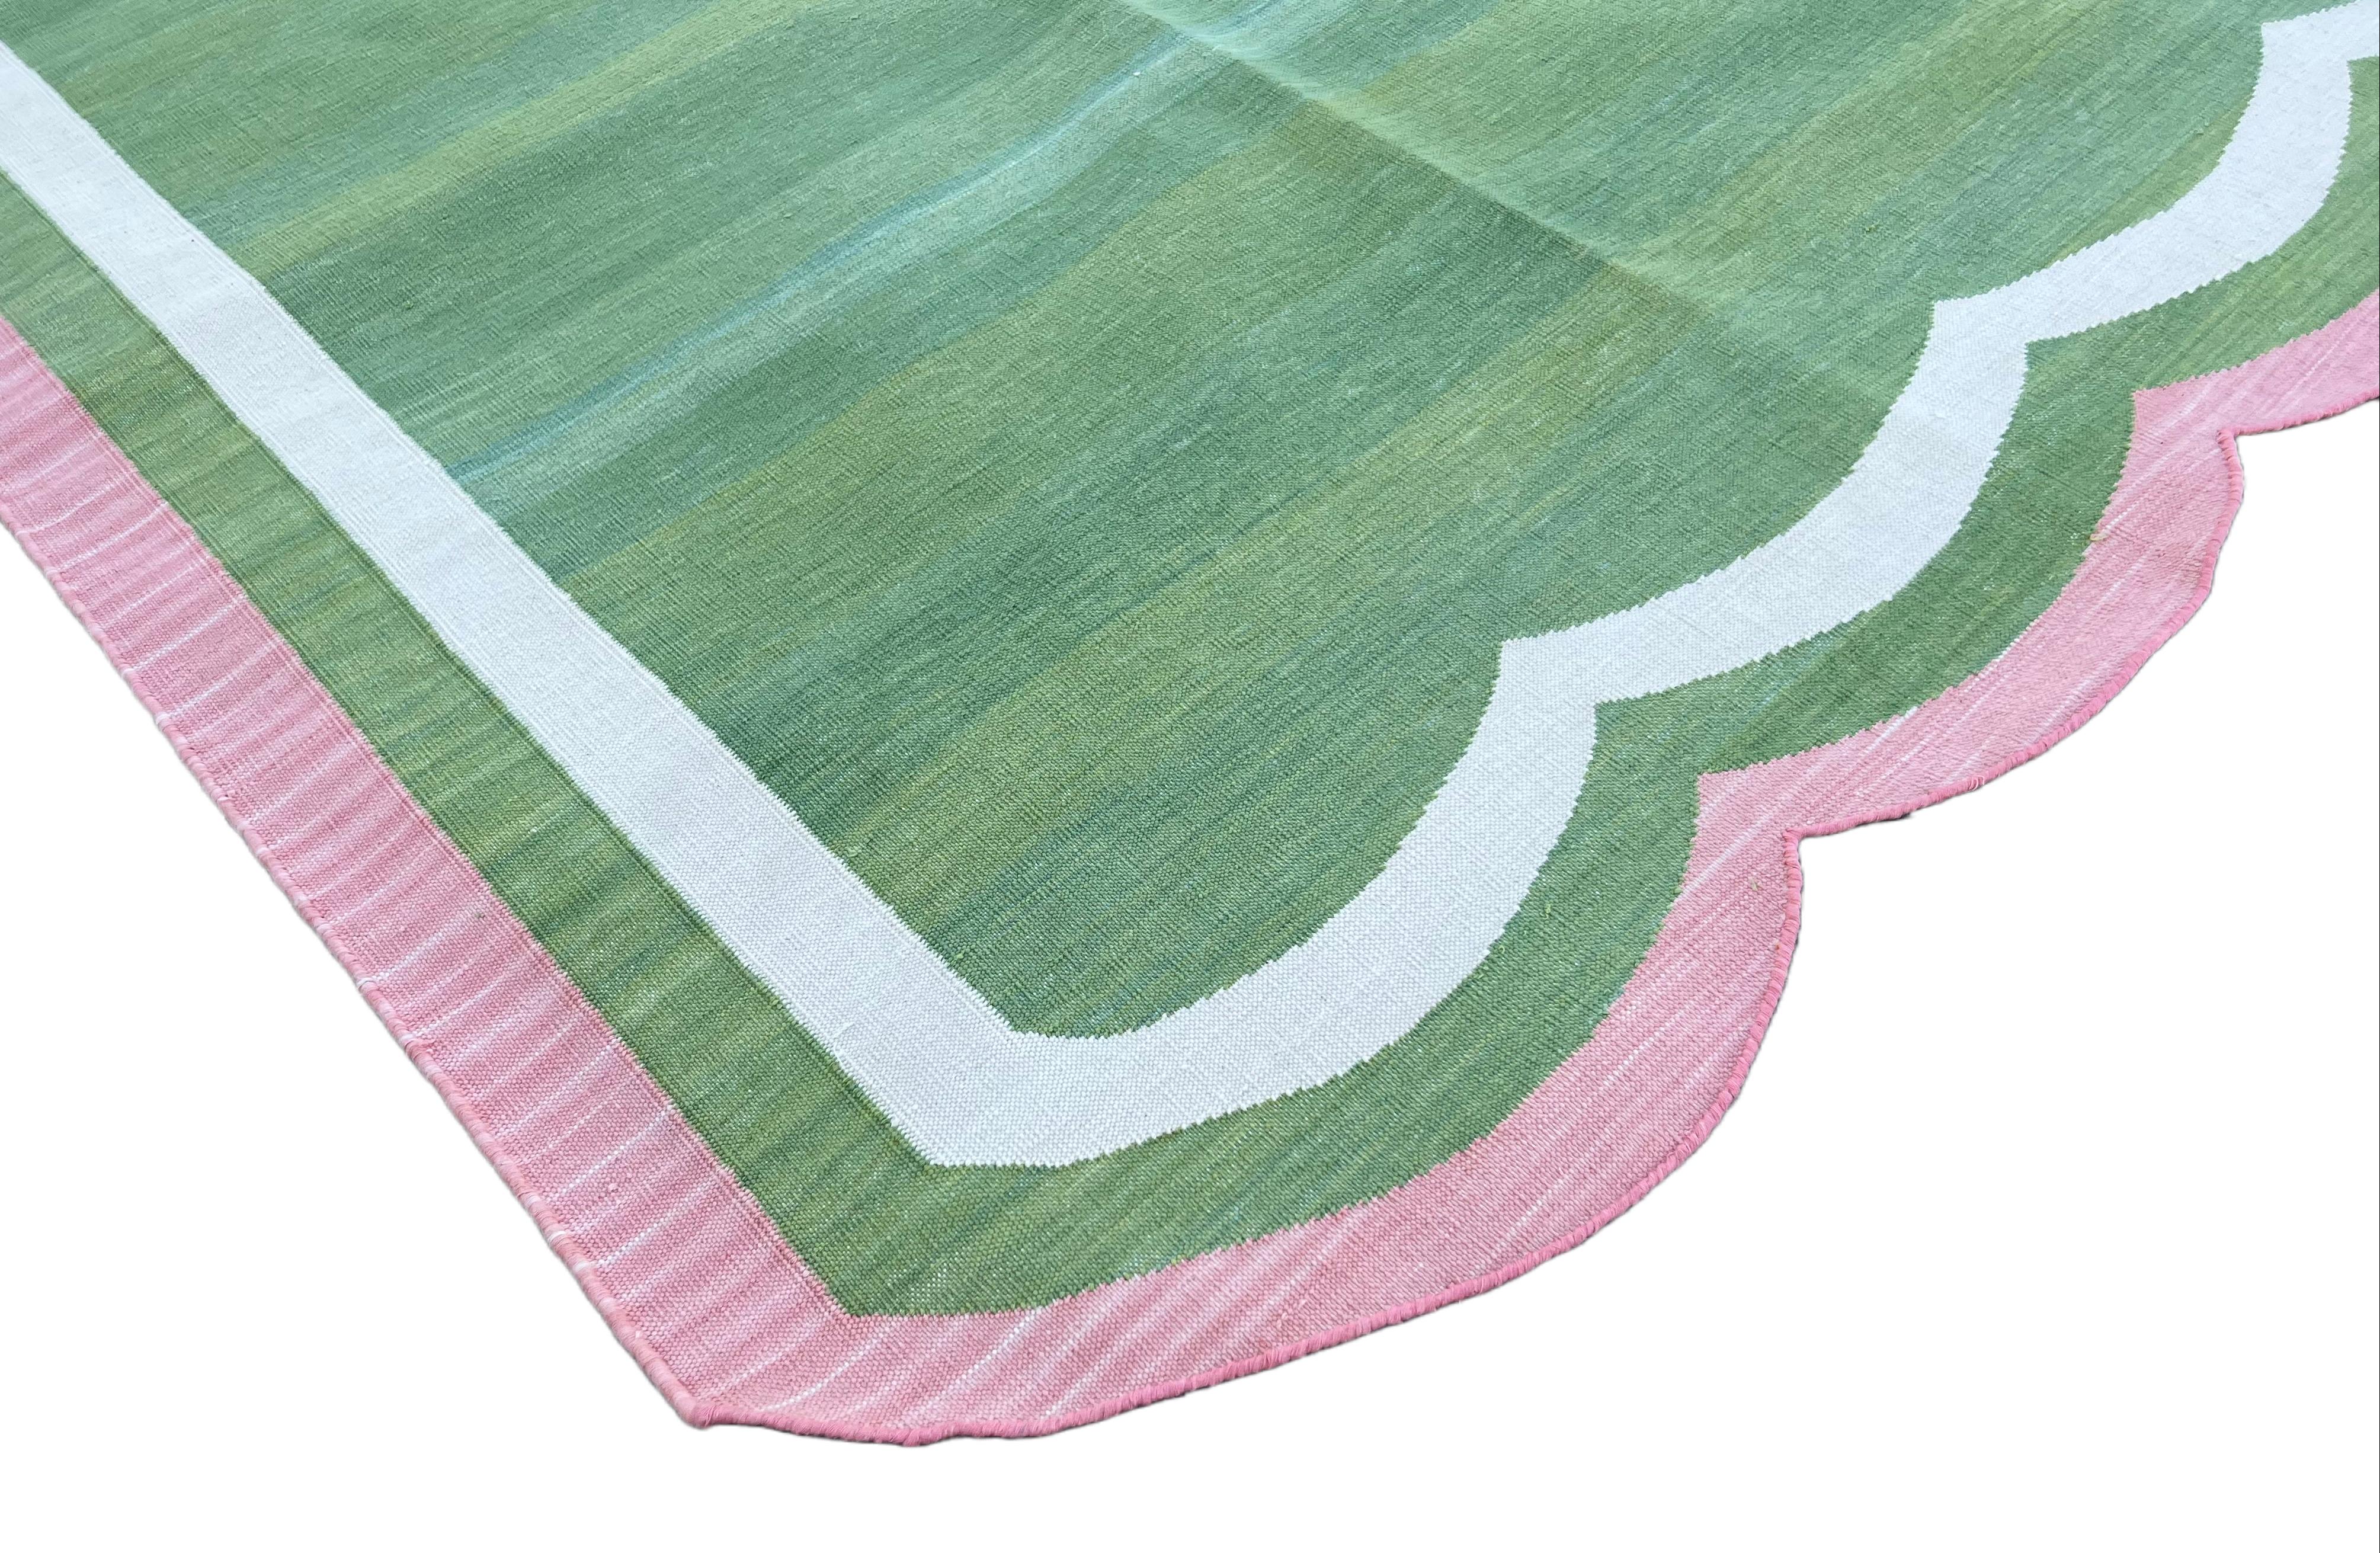 Indian Handmade Cotton Area Flat Weave Rug, 8x10 Green And Pink Scallop Striped Dhurrie For Sale